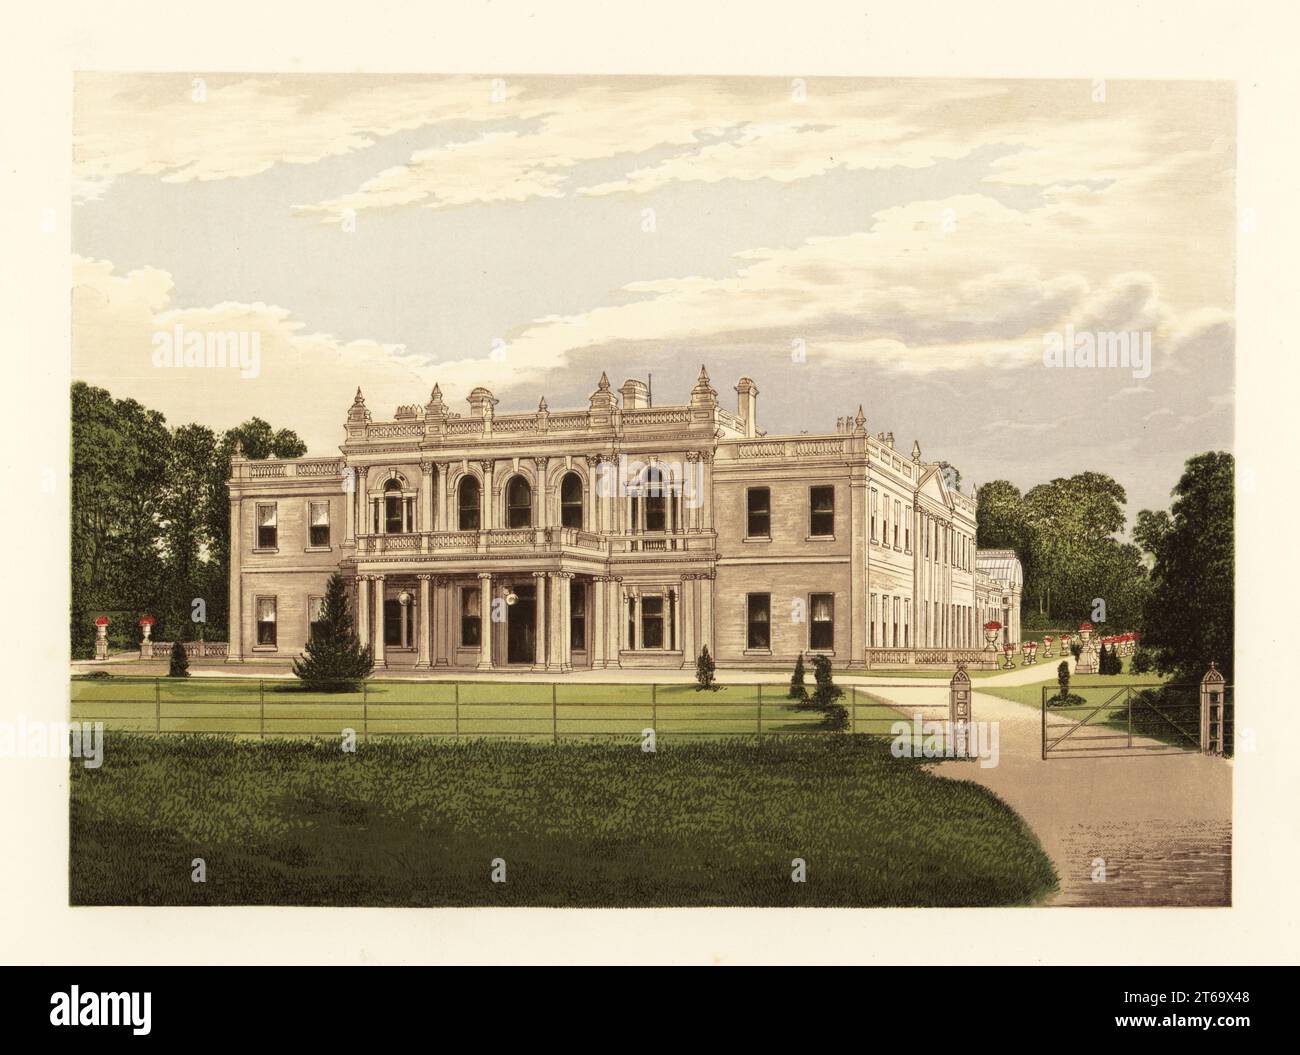 Rolleston Hall, Staffordshire, England. House occupied since the reign of Henry III, 13th century, destroyed by fire in 1871, and rebuilt soon after by Sir Tonman Mosley, 3rd Baronet, ancestor of the fascist Oswald Mosley. Colour woodblock by Benjamin Fawcett in the Baxter process of an illustration by Alexander Francis Lydon from Reverend Francis Orpen Morriss A Series of Picturesque Views of the Seats of Noblemen and Gentlemen of Great Britain and Ireland, William Mackenzie, London, 1880. Stock Photo